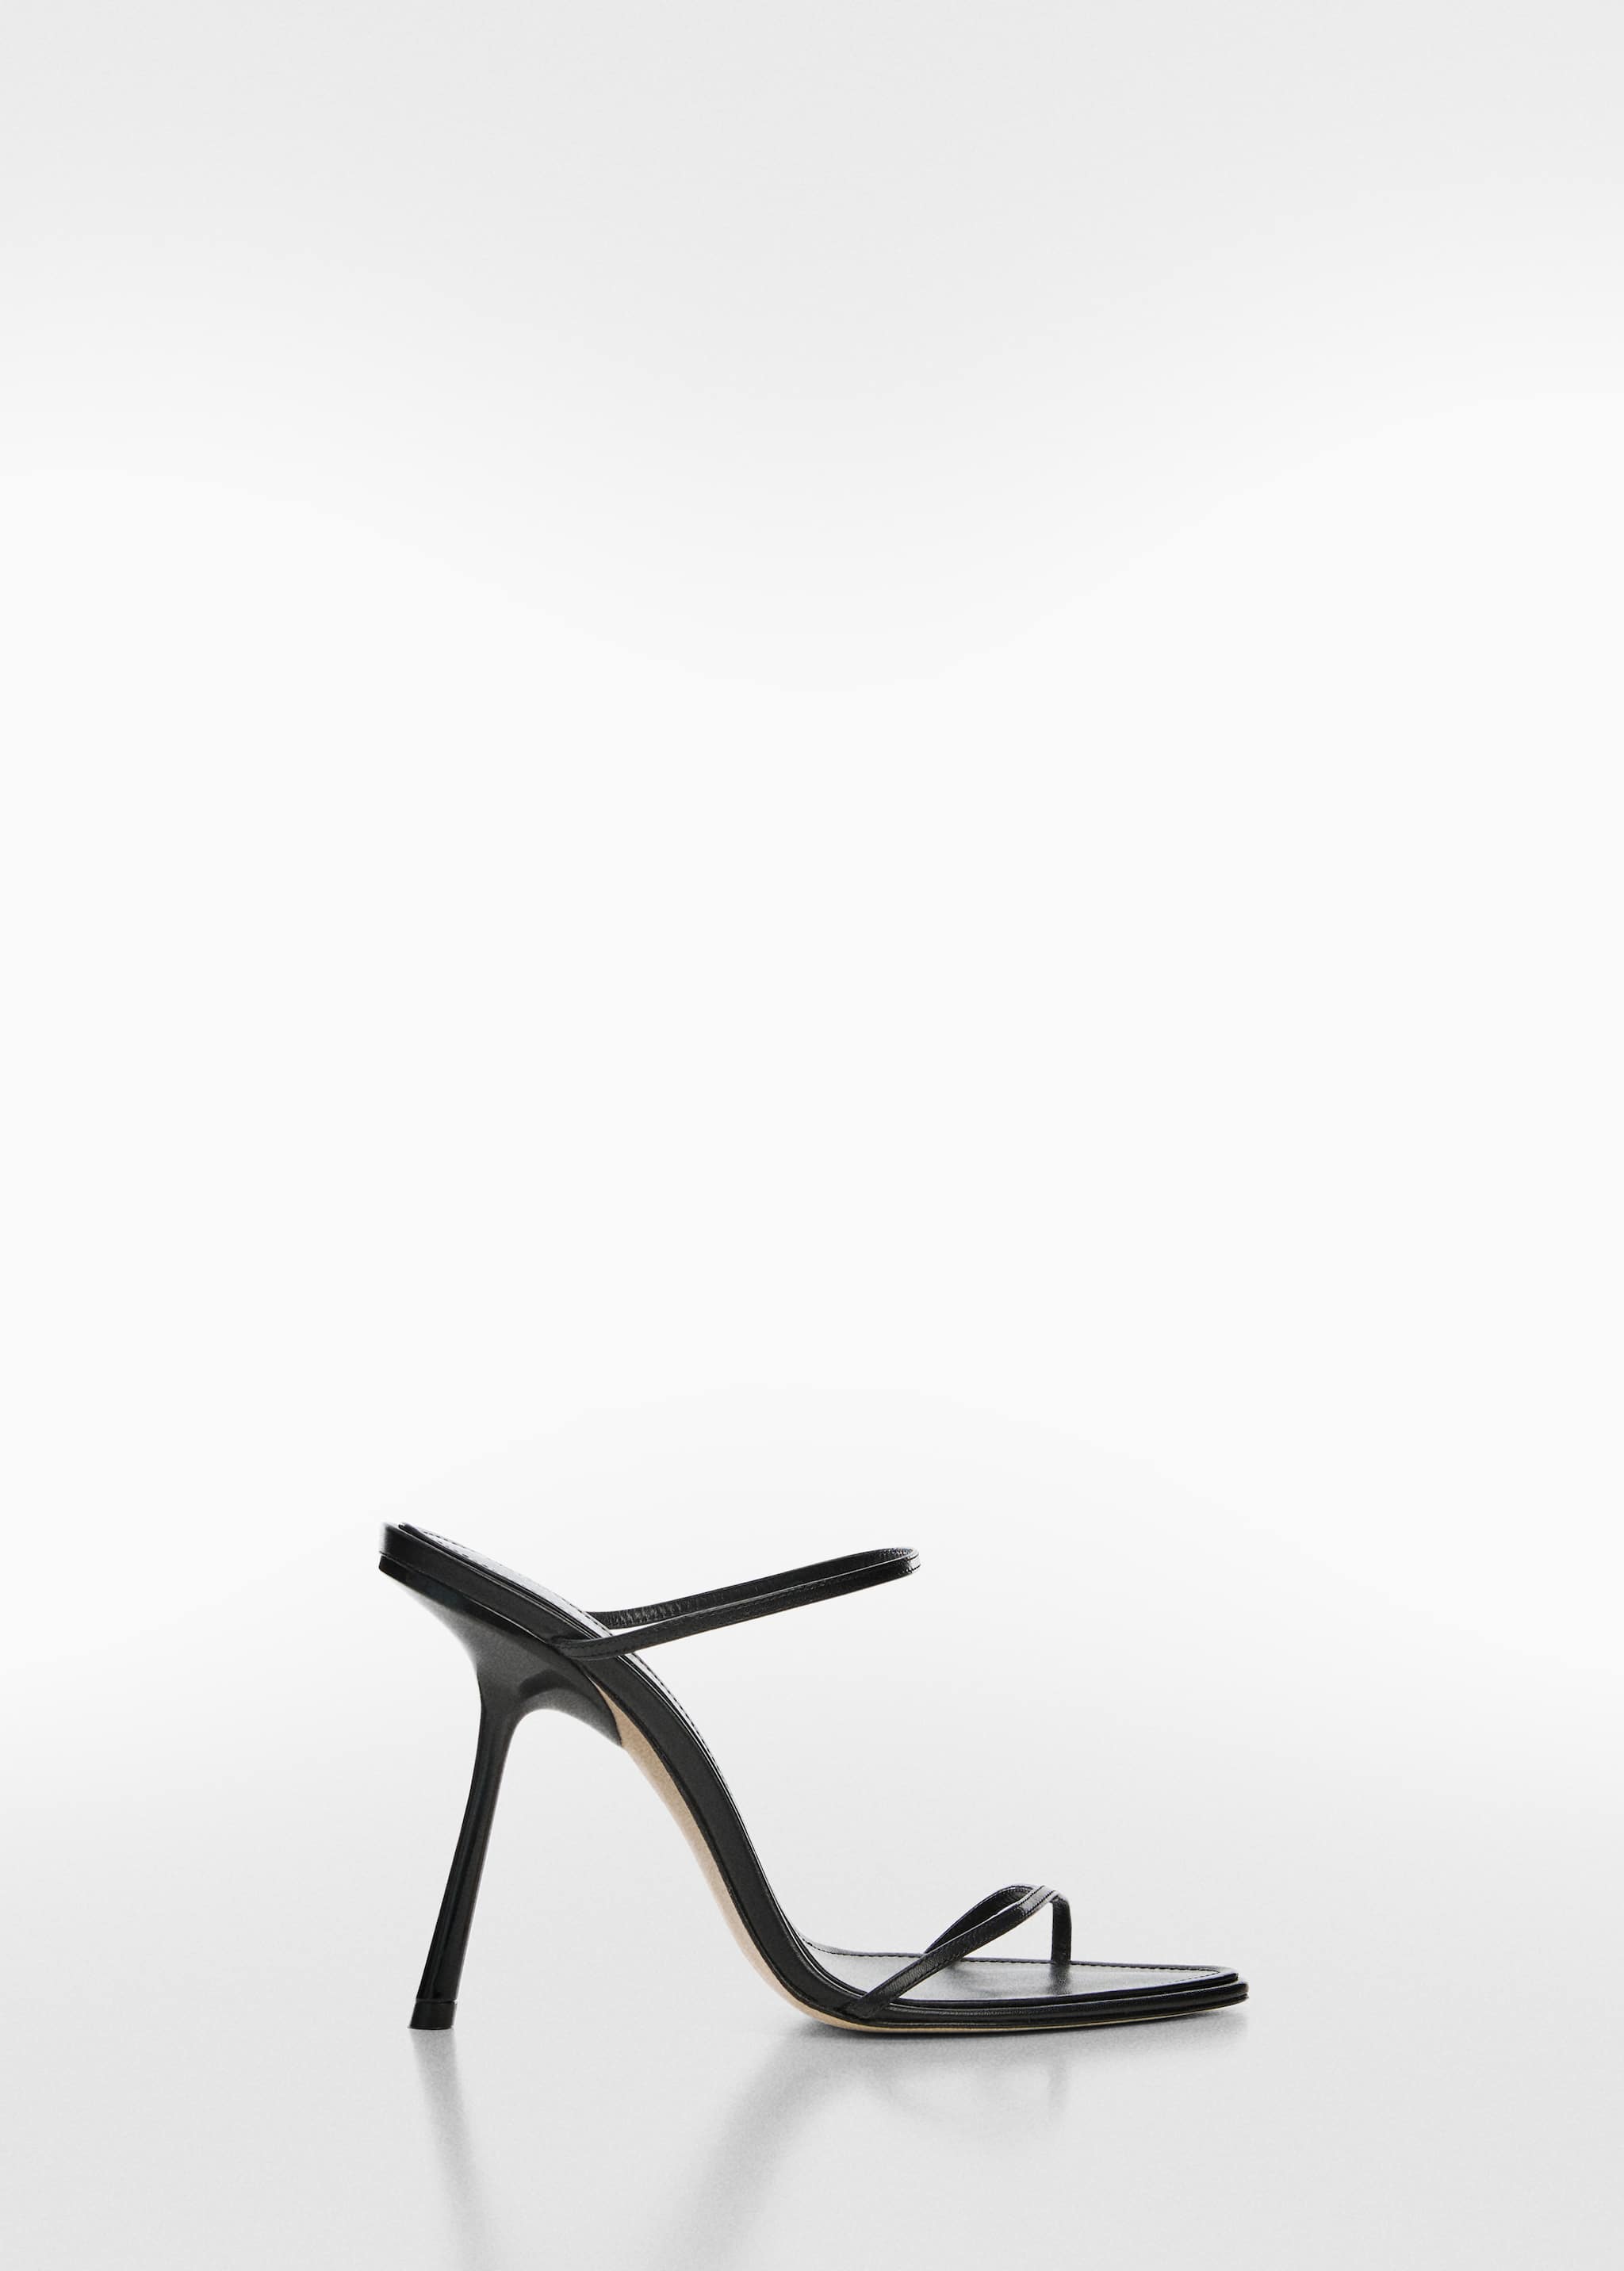 Leather sandal with inclined heel - Article without model